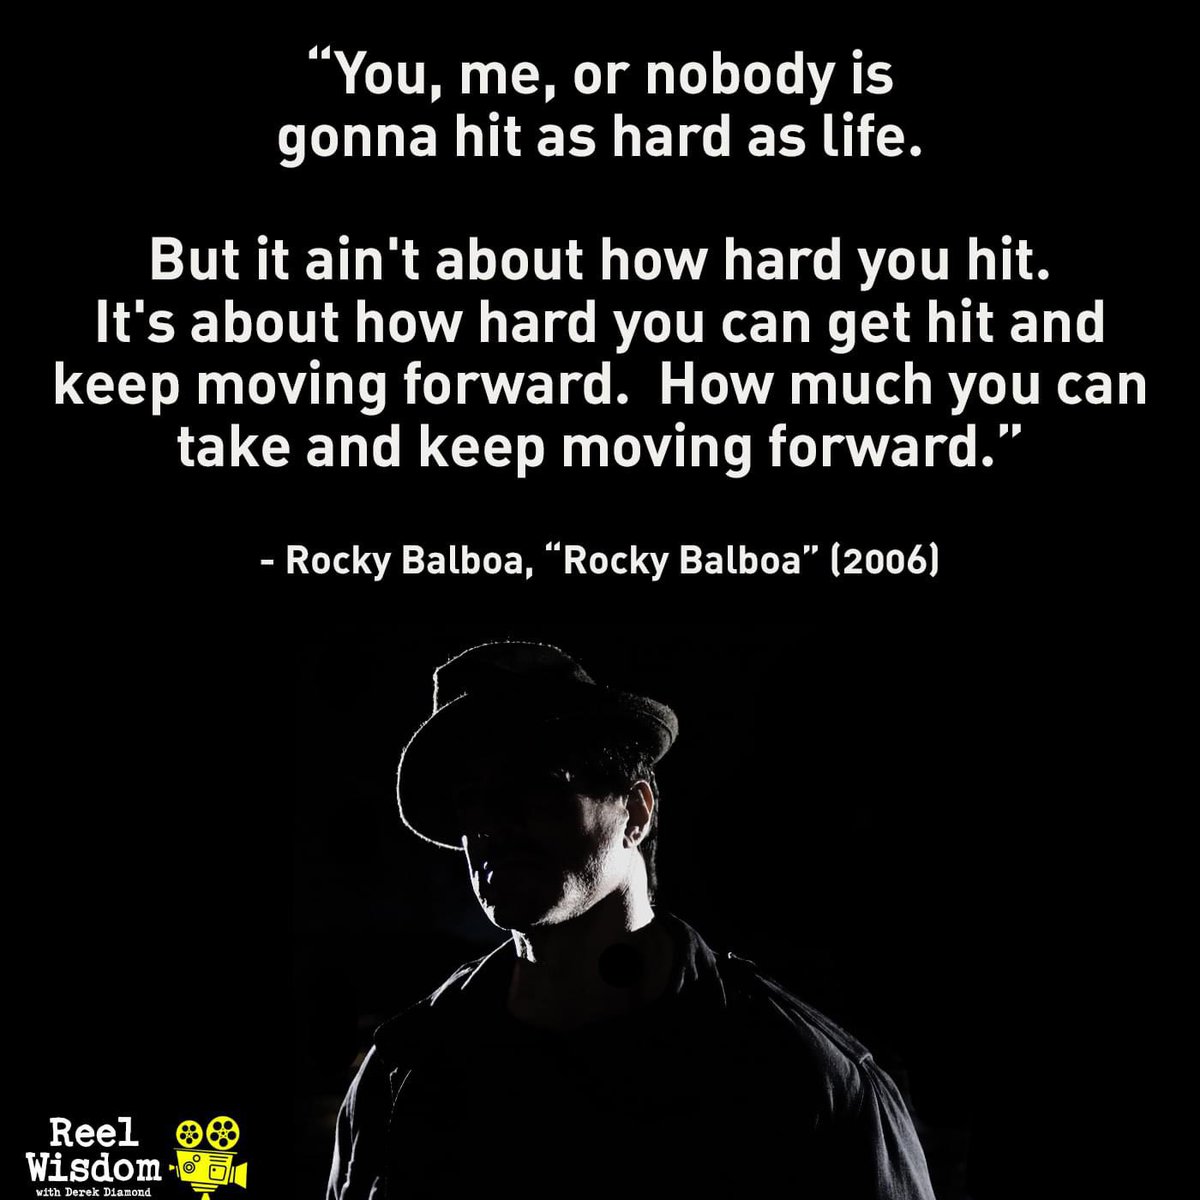 'You, me, or nobody is gonna hit as hard as life. But it ain't about how hard you hit. It's about how hard you can get hit and keep moving forward. How much you can take and keep moving forward.'

- Rocky Balboa, 'Rocky Balboa' (2006)

#Film #Filmmaking #MovieQuotes #Rocky